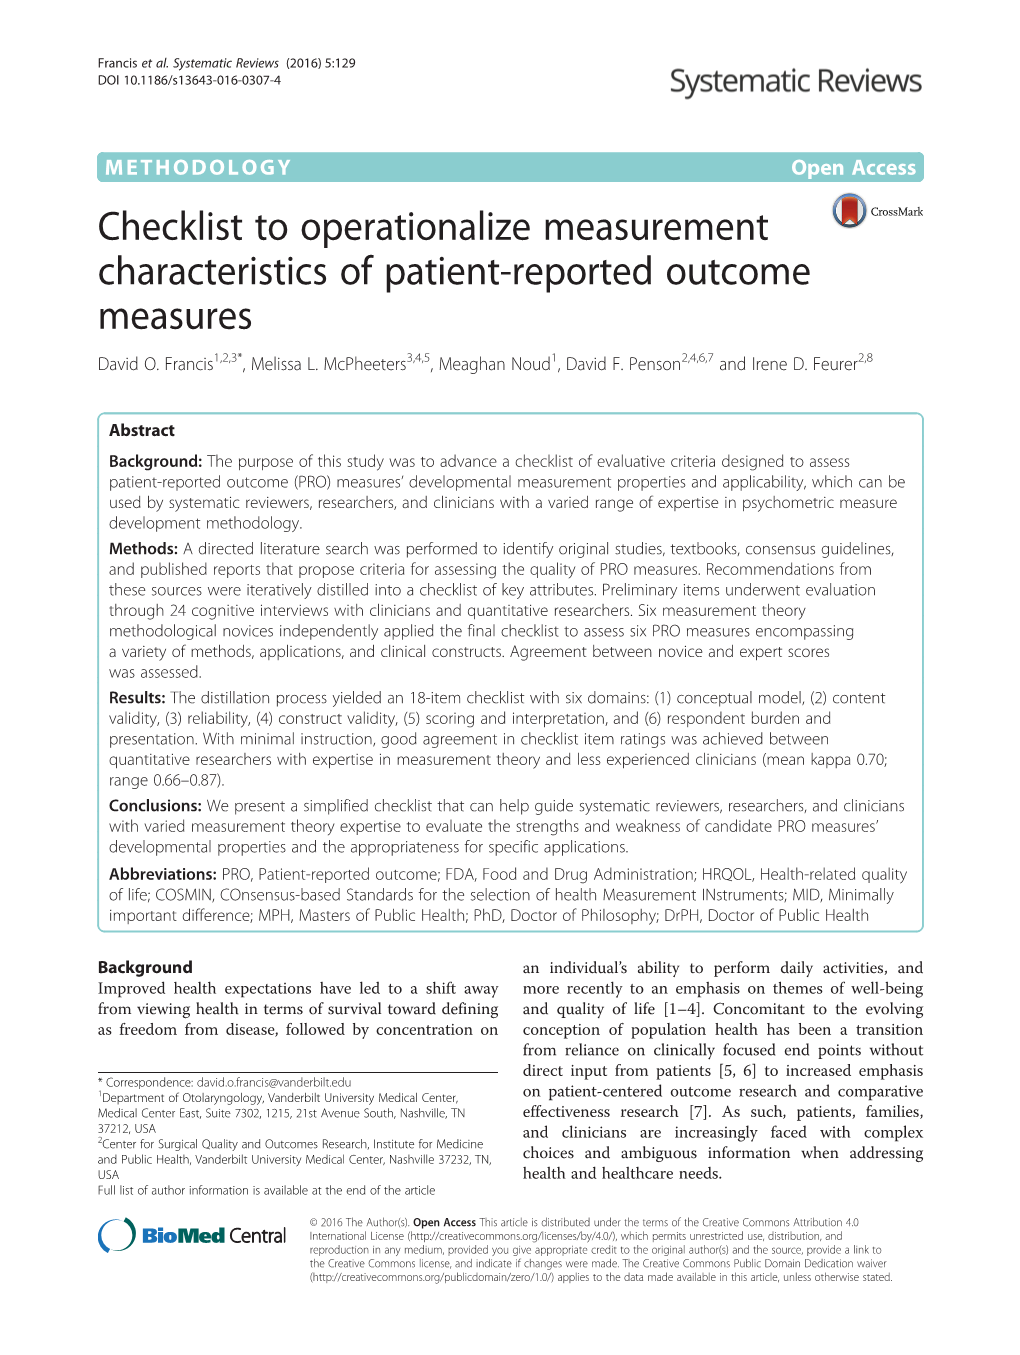 Checklist to Operationalize Measurement Characteristics of Patient-Reported Outcome Measures David O